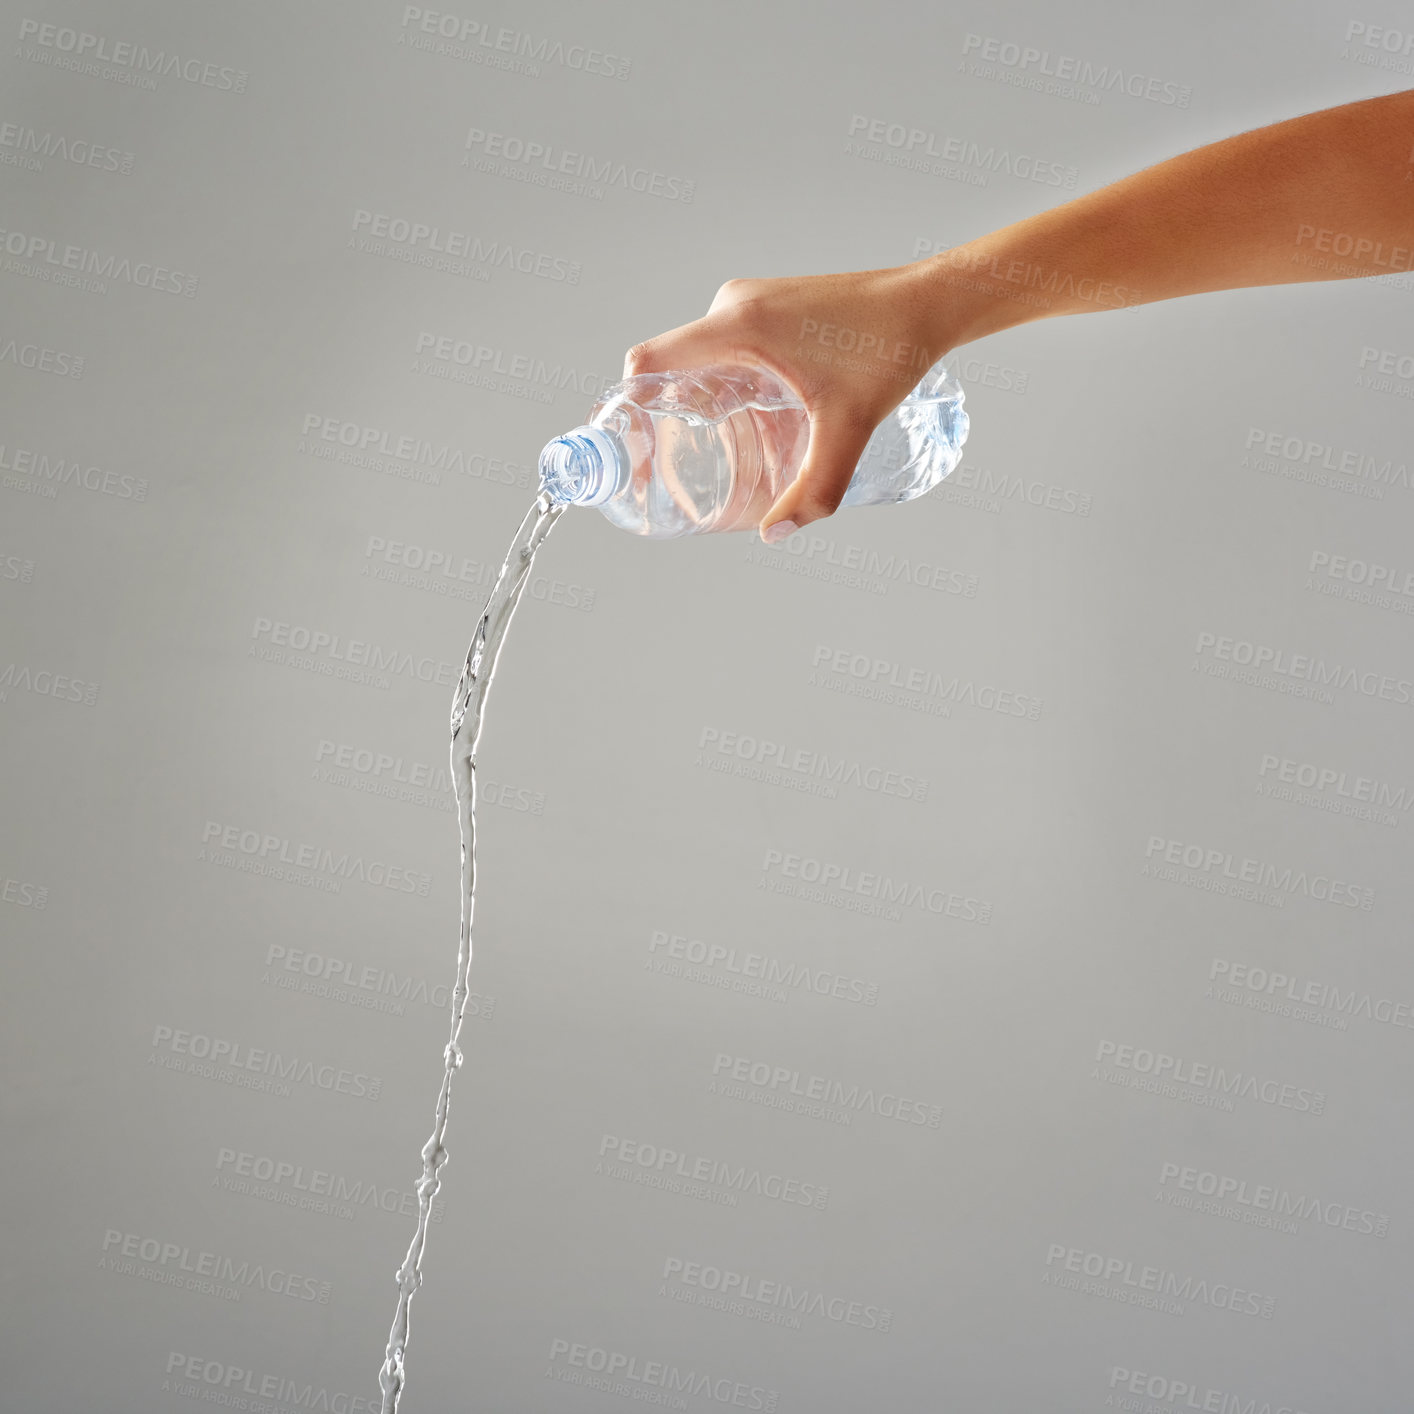 Buy stock photo Cropped shot of water being poured out of a bottle against a grey background